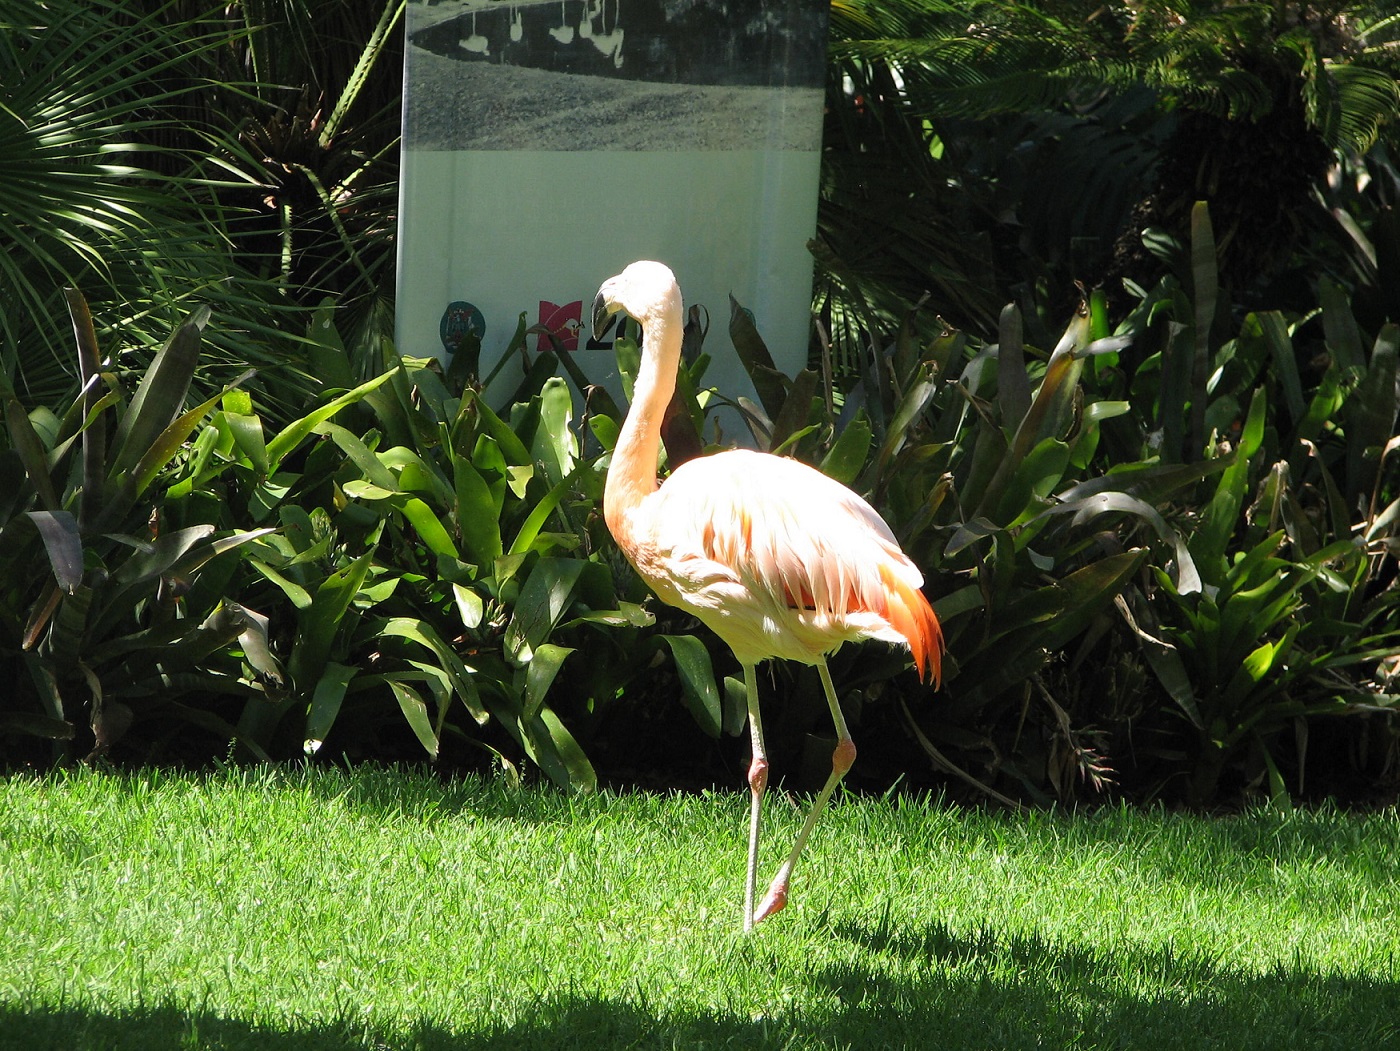 Adelaide's Famous Tourist Attractions - Adelaide Zoological Gardens